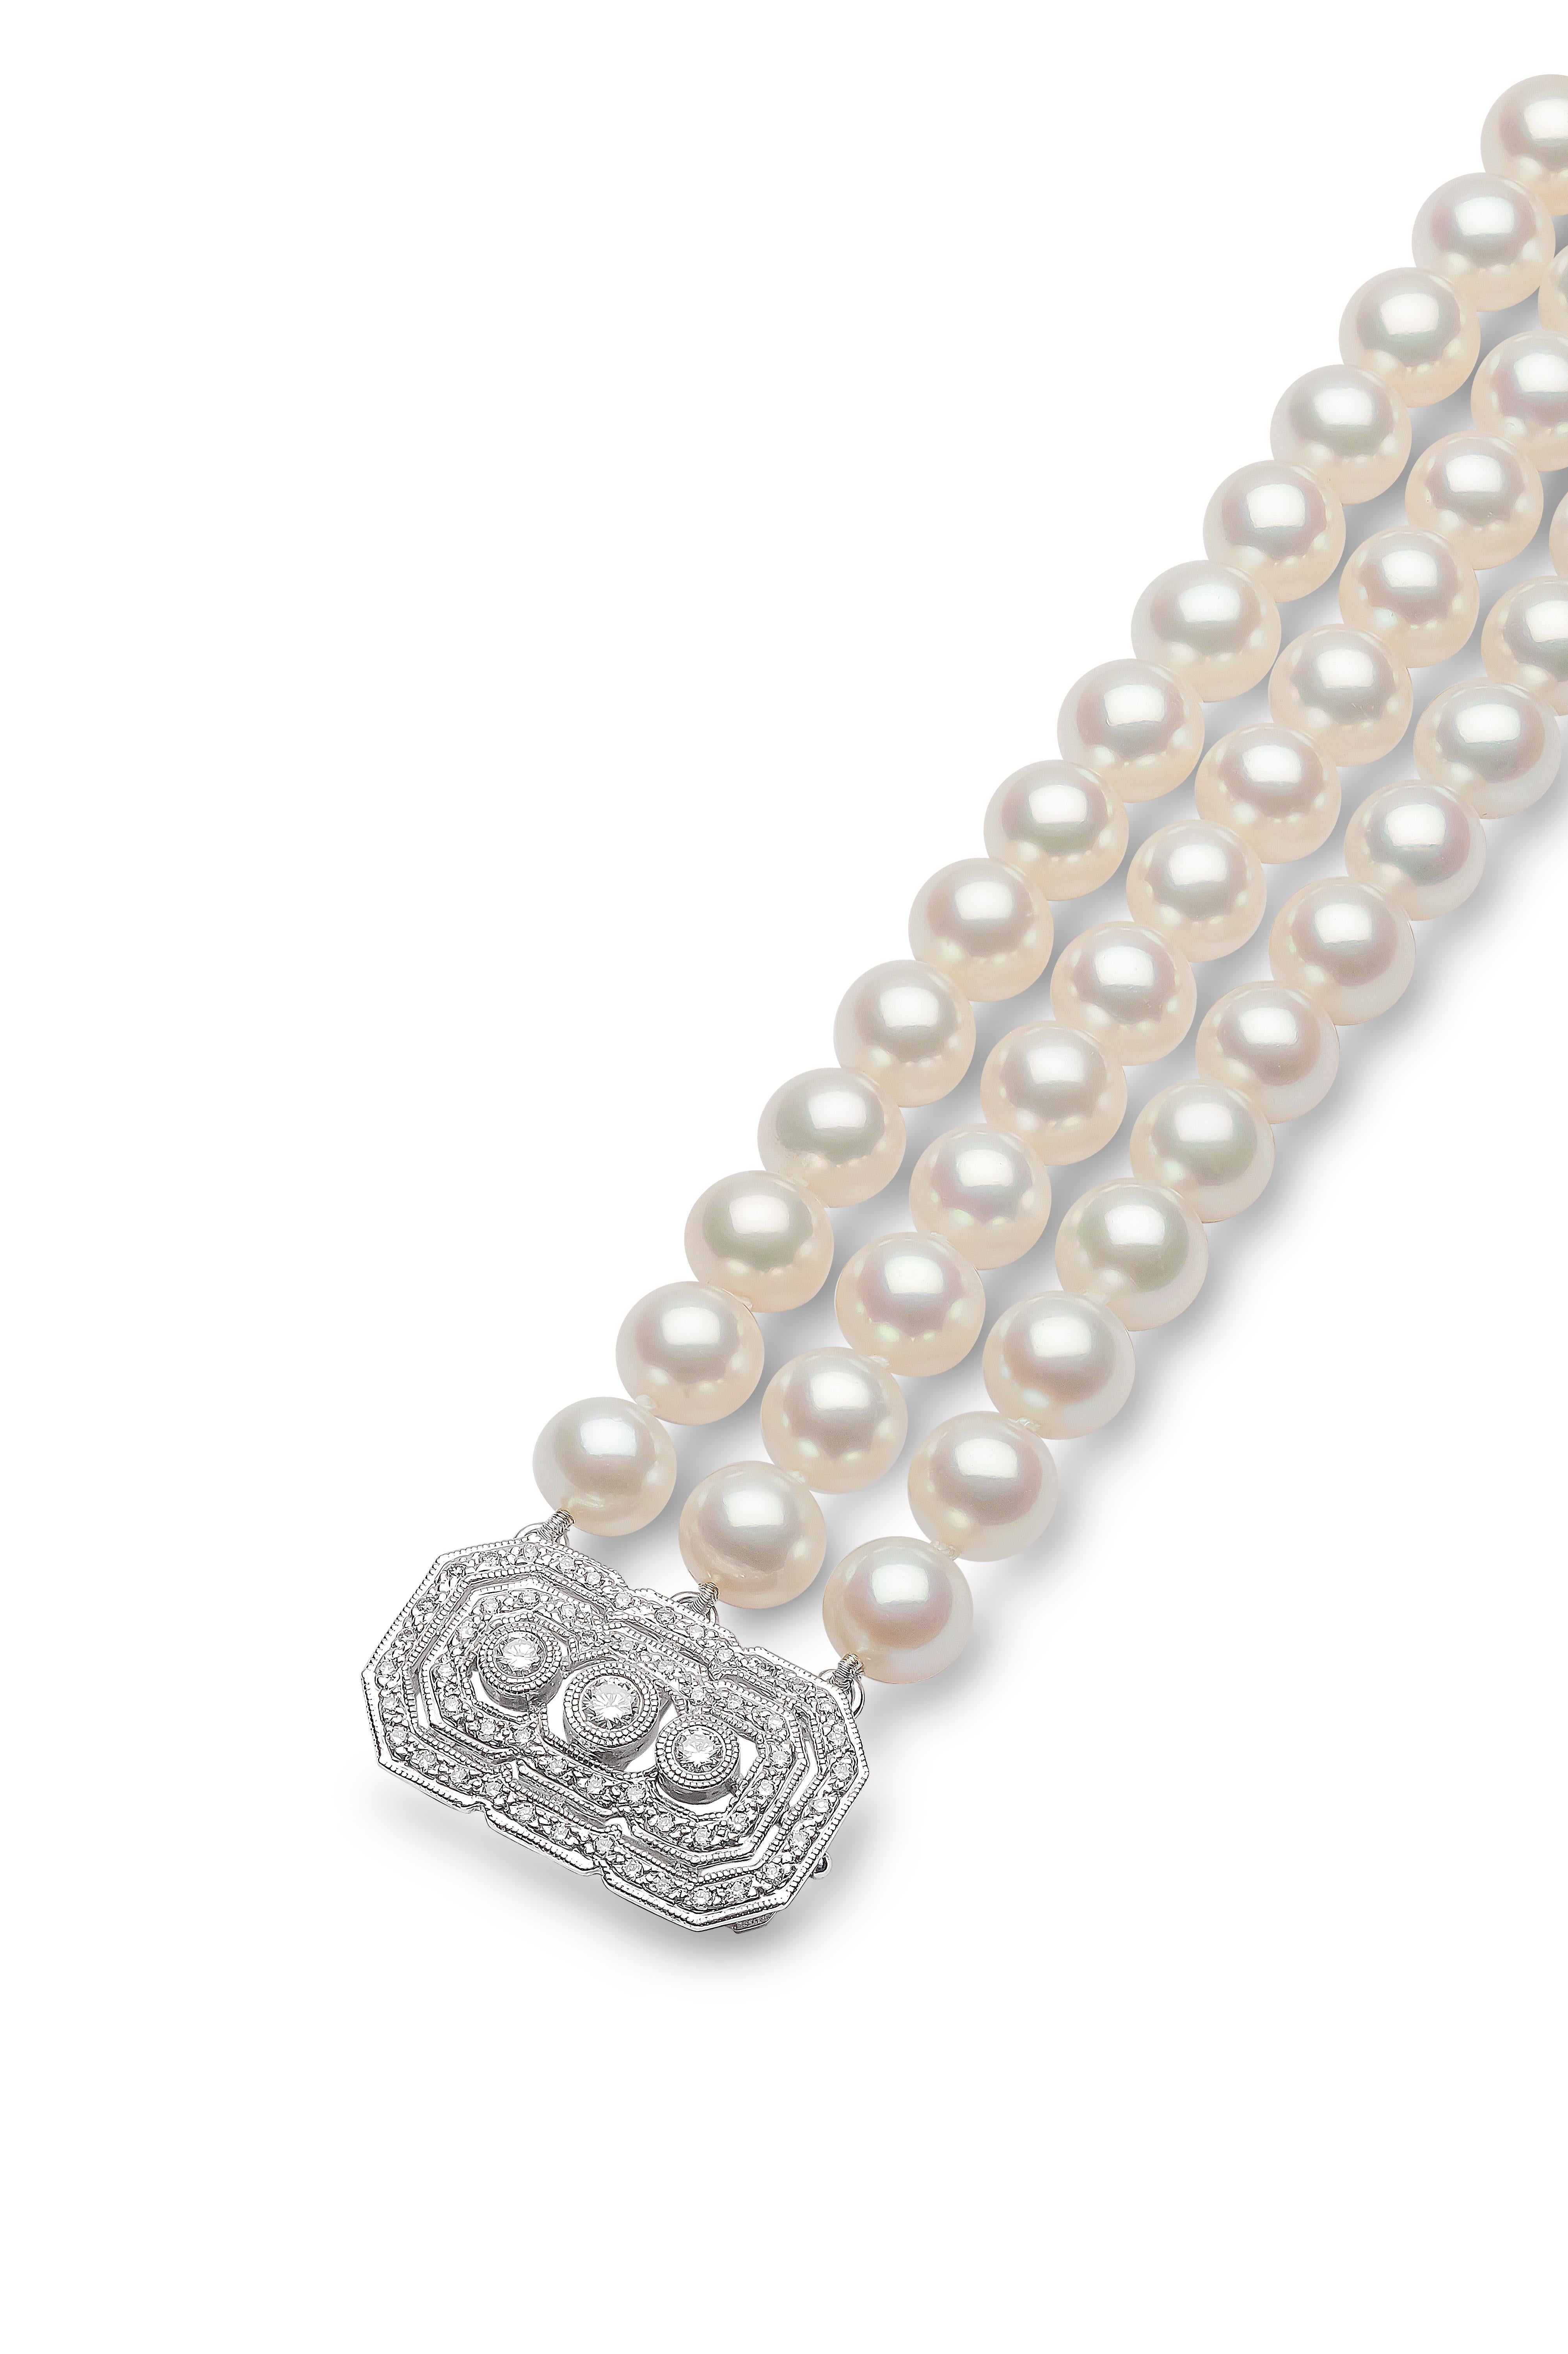 This elegant pearl choker by Yoko London features three rows of lustrous 7.5-8mm Freshwater pearls and an ornate diamond clasp. The diamond clasp is designed to be worn at the front of the neck to add a touch of sparkle to a formal look. Hand